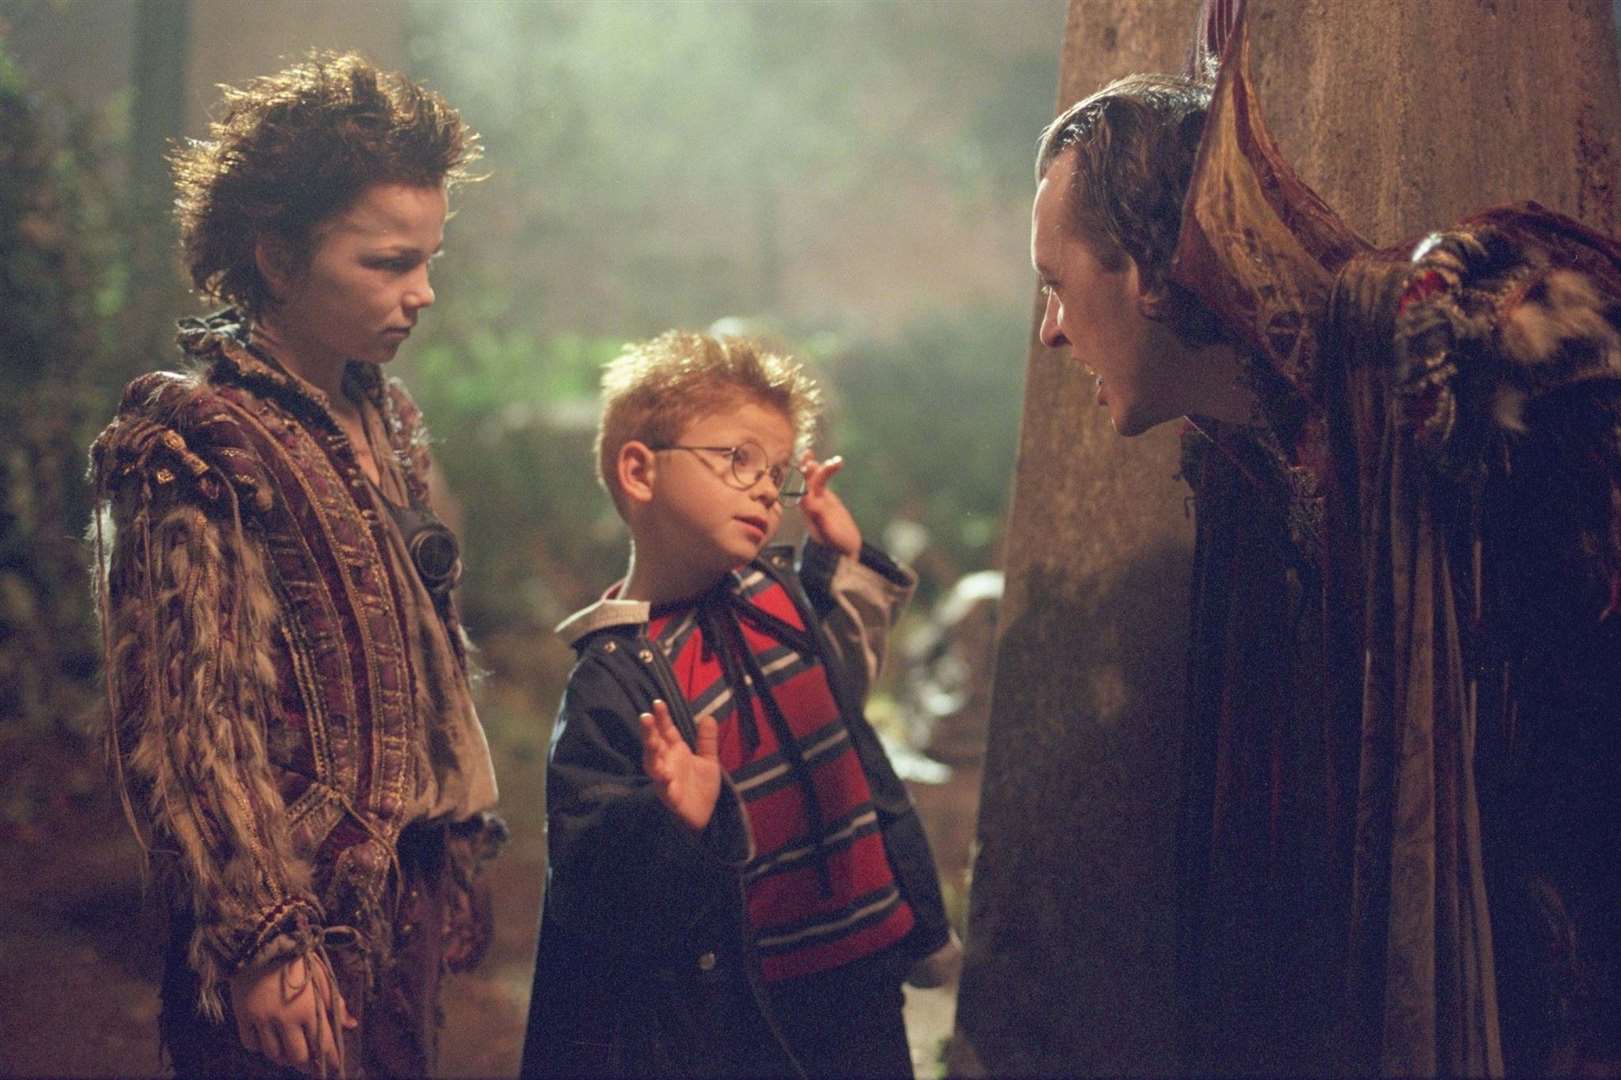 A scene from The Little Vampire featuring Richard E. Grant and Jonathan Lipnicki.